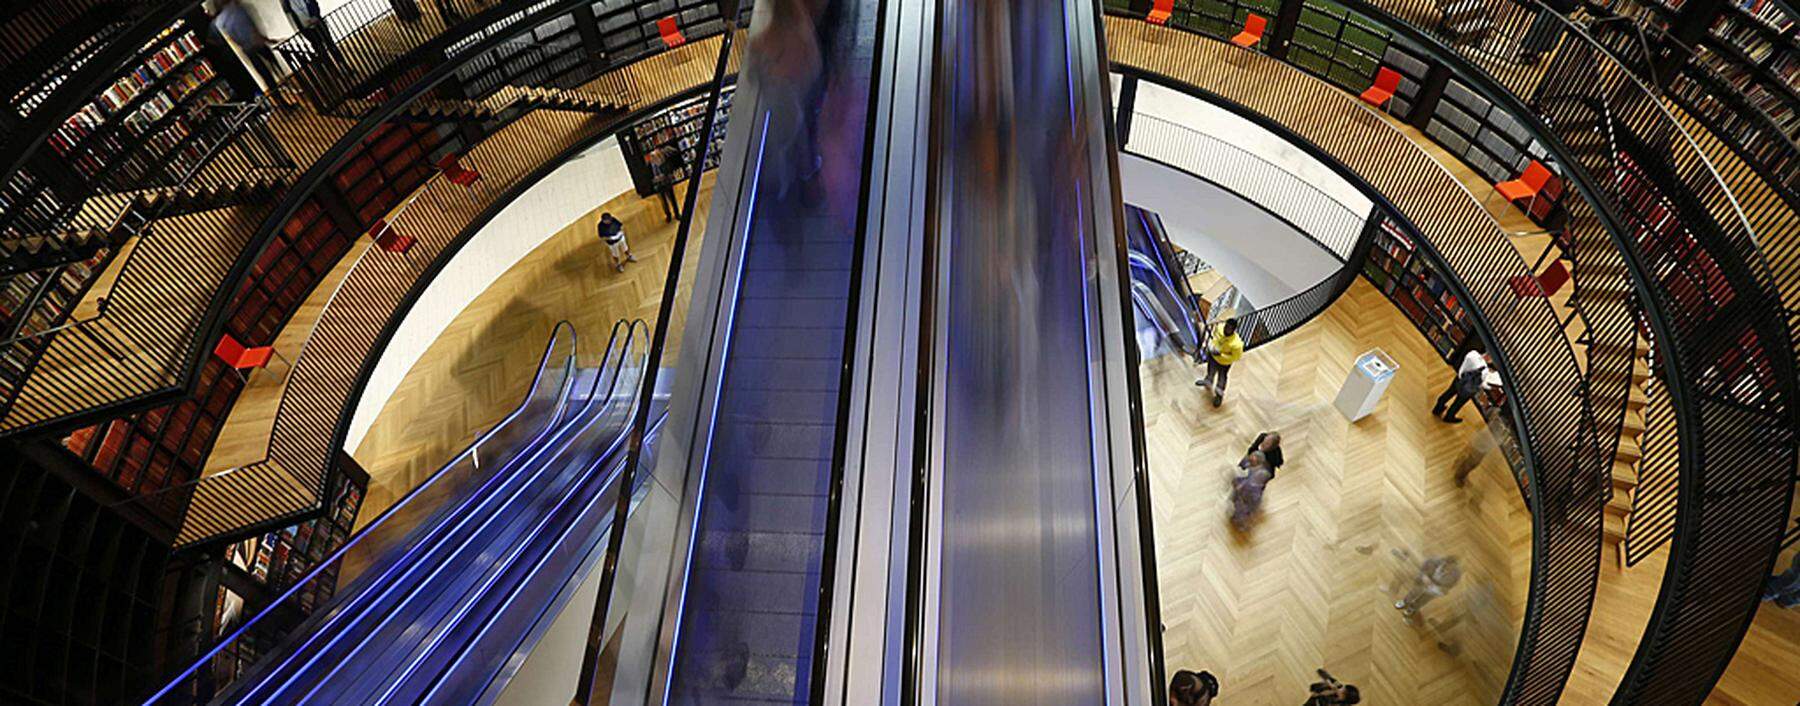 Visitors travel on an escalator after the opening of Birmingham Library in central England